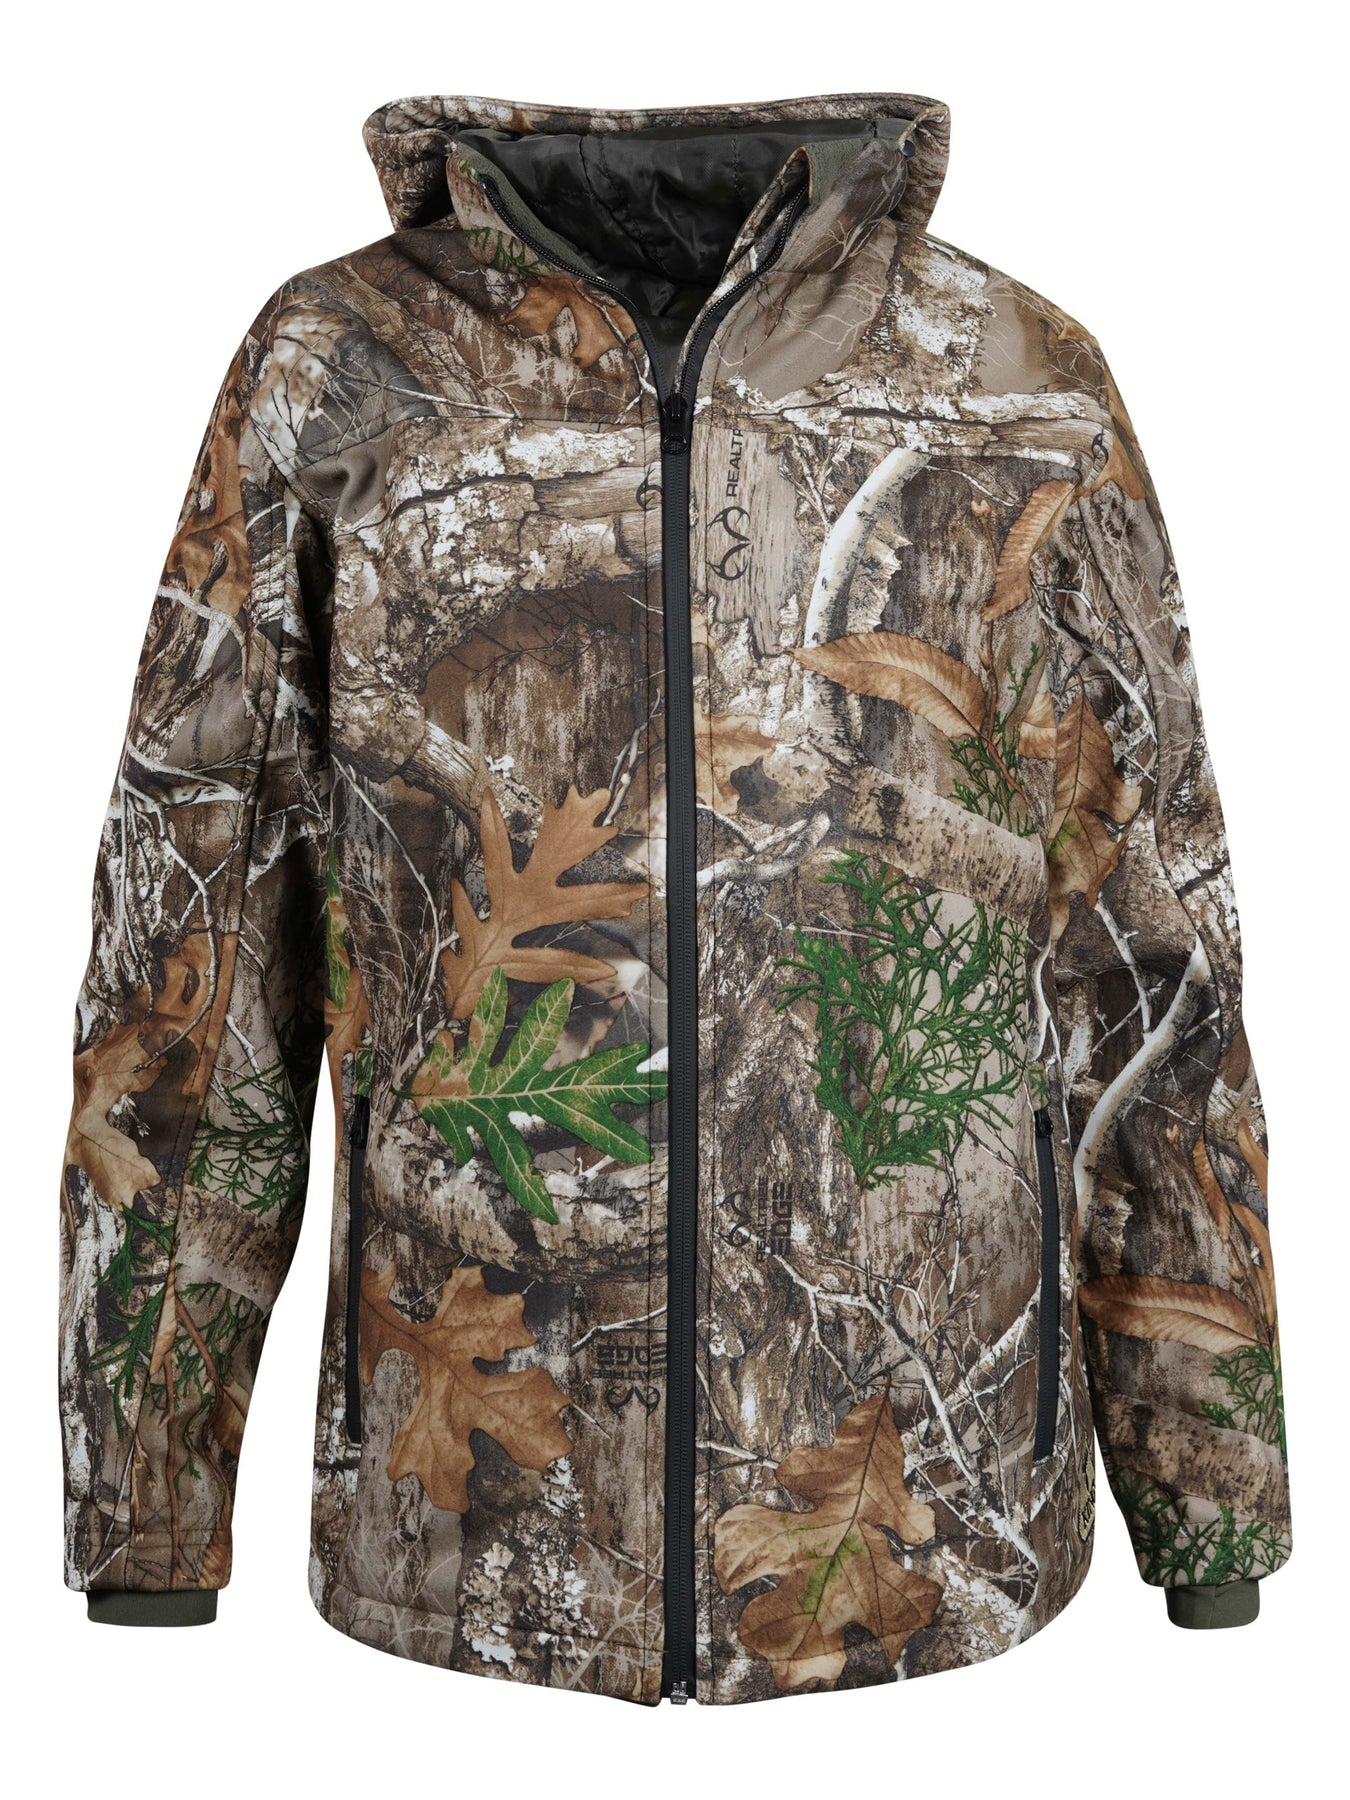 Women's Weather Pro Insulated Jacket in Realtree Edge | King's Camo